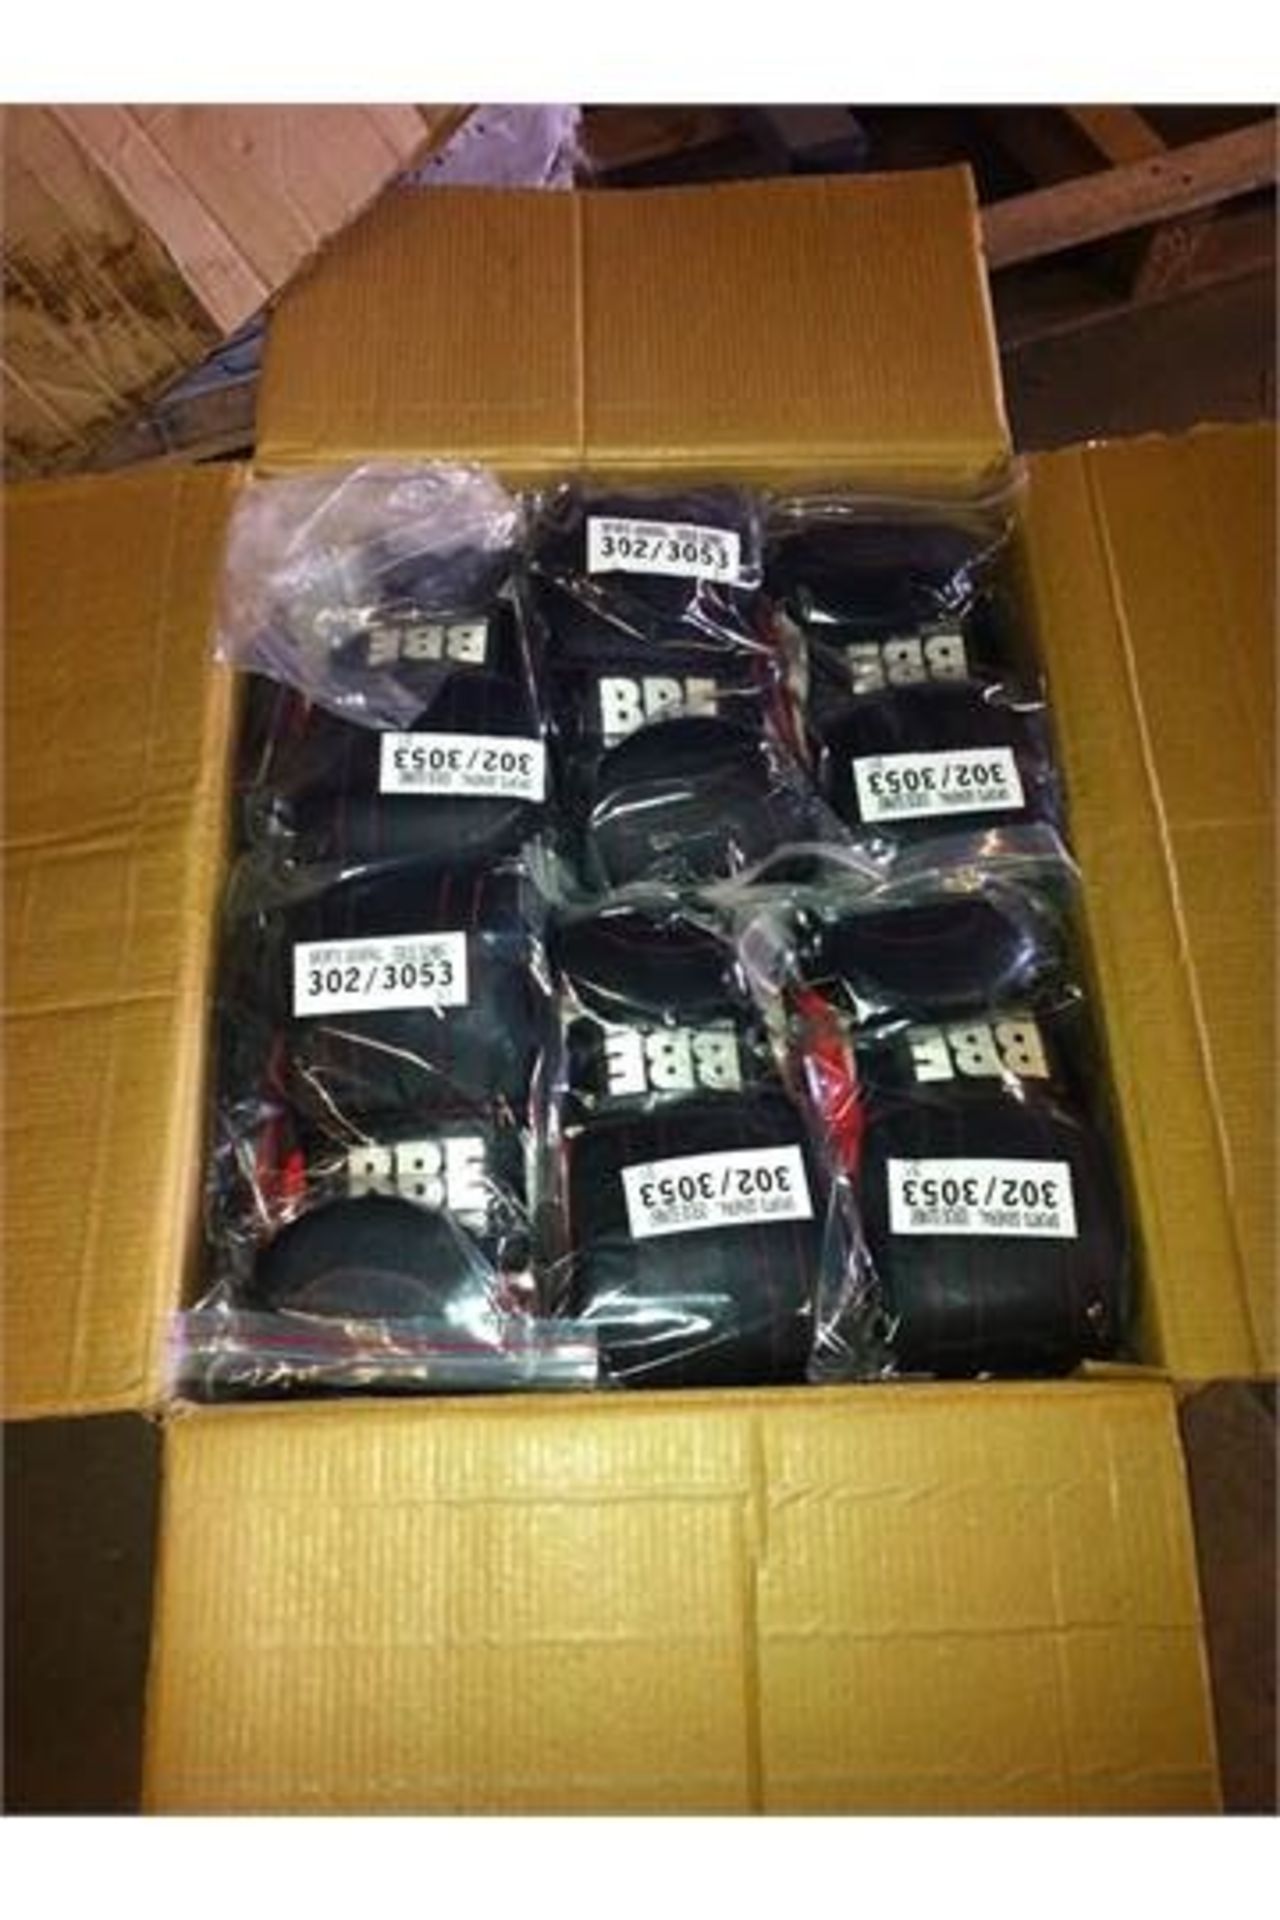 2 x Boxes of BBE Boxing Gloves - 40 pairs per box - Image 2 of 2